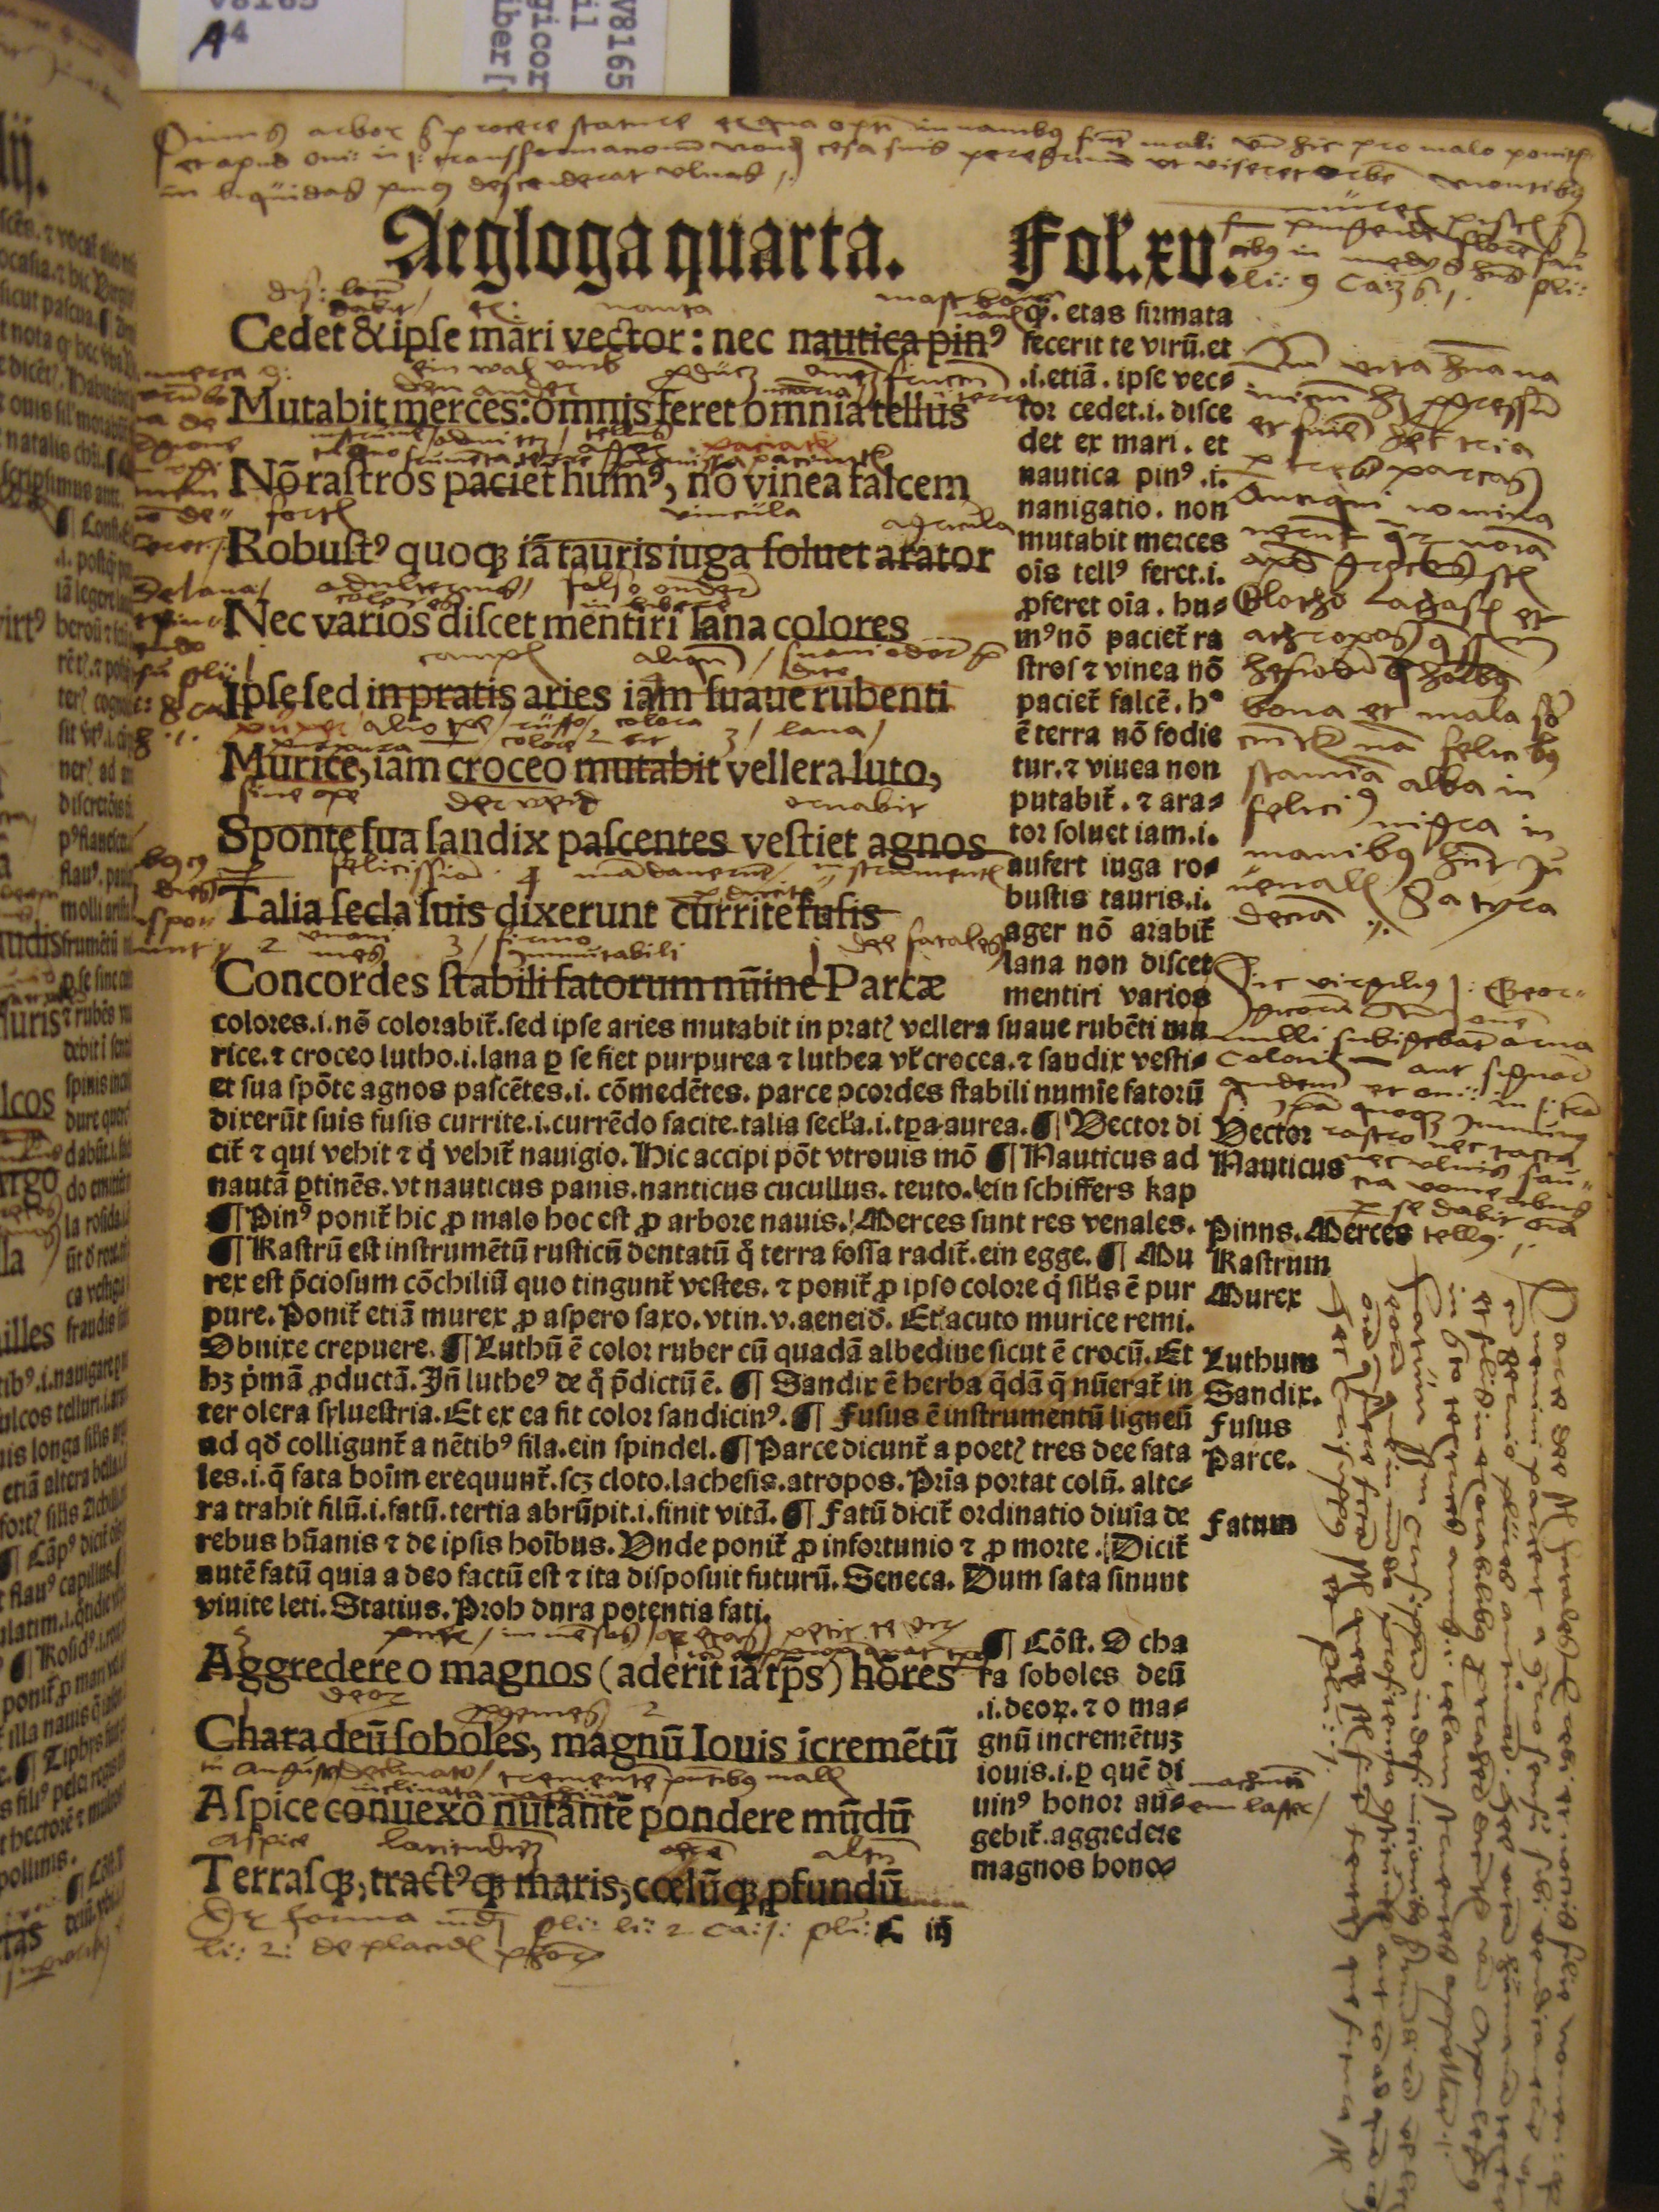 Annotations between the lines and in the margins of Virgil's Eclogues. This book will be displayed at the New York Society Library's upcoming exhibition, "Readers Make Their Mark," Feb. 5 - Aug. 15.